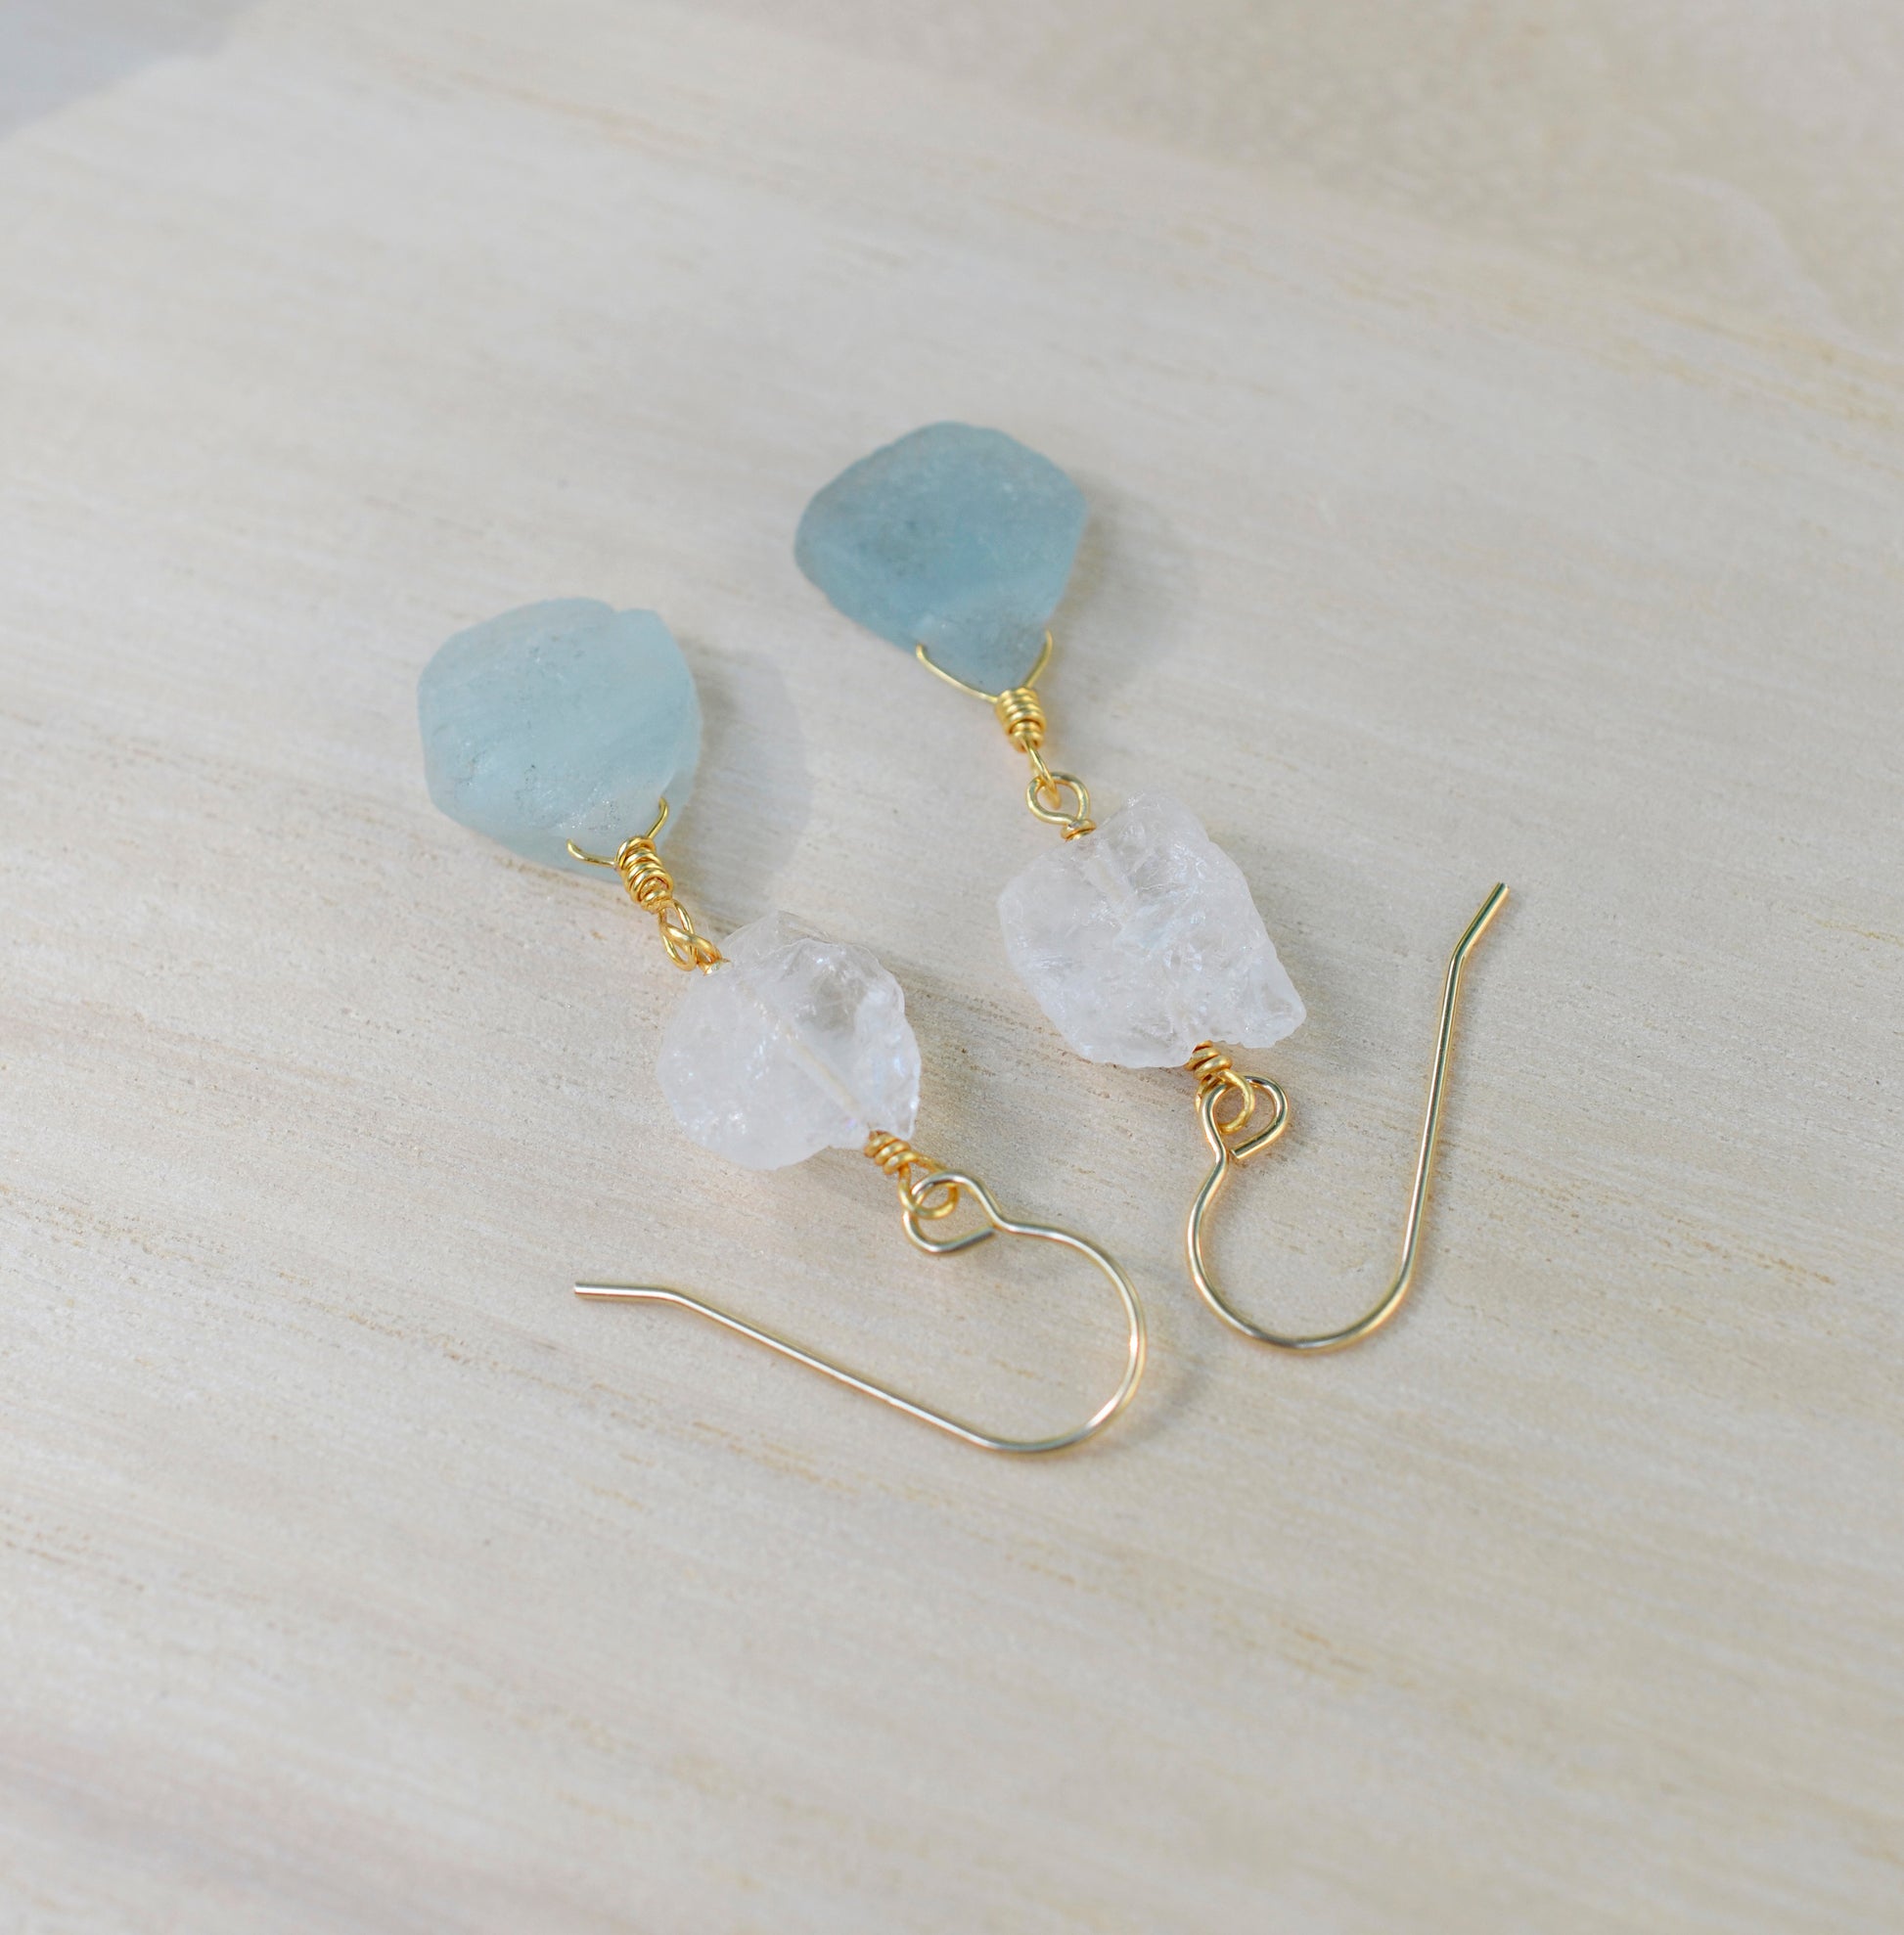 Aquamarine and Crystal Quartz Earrings, 14k Gold Filled or Sterling Silver, Natural Gemstone Dangles, March Birthstone, Crystal Drops, Raw Stone Earrings